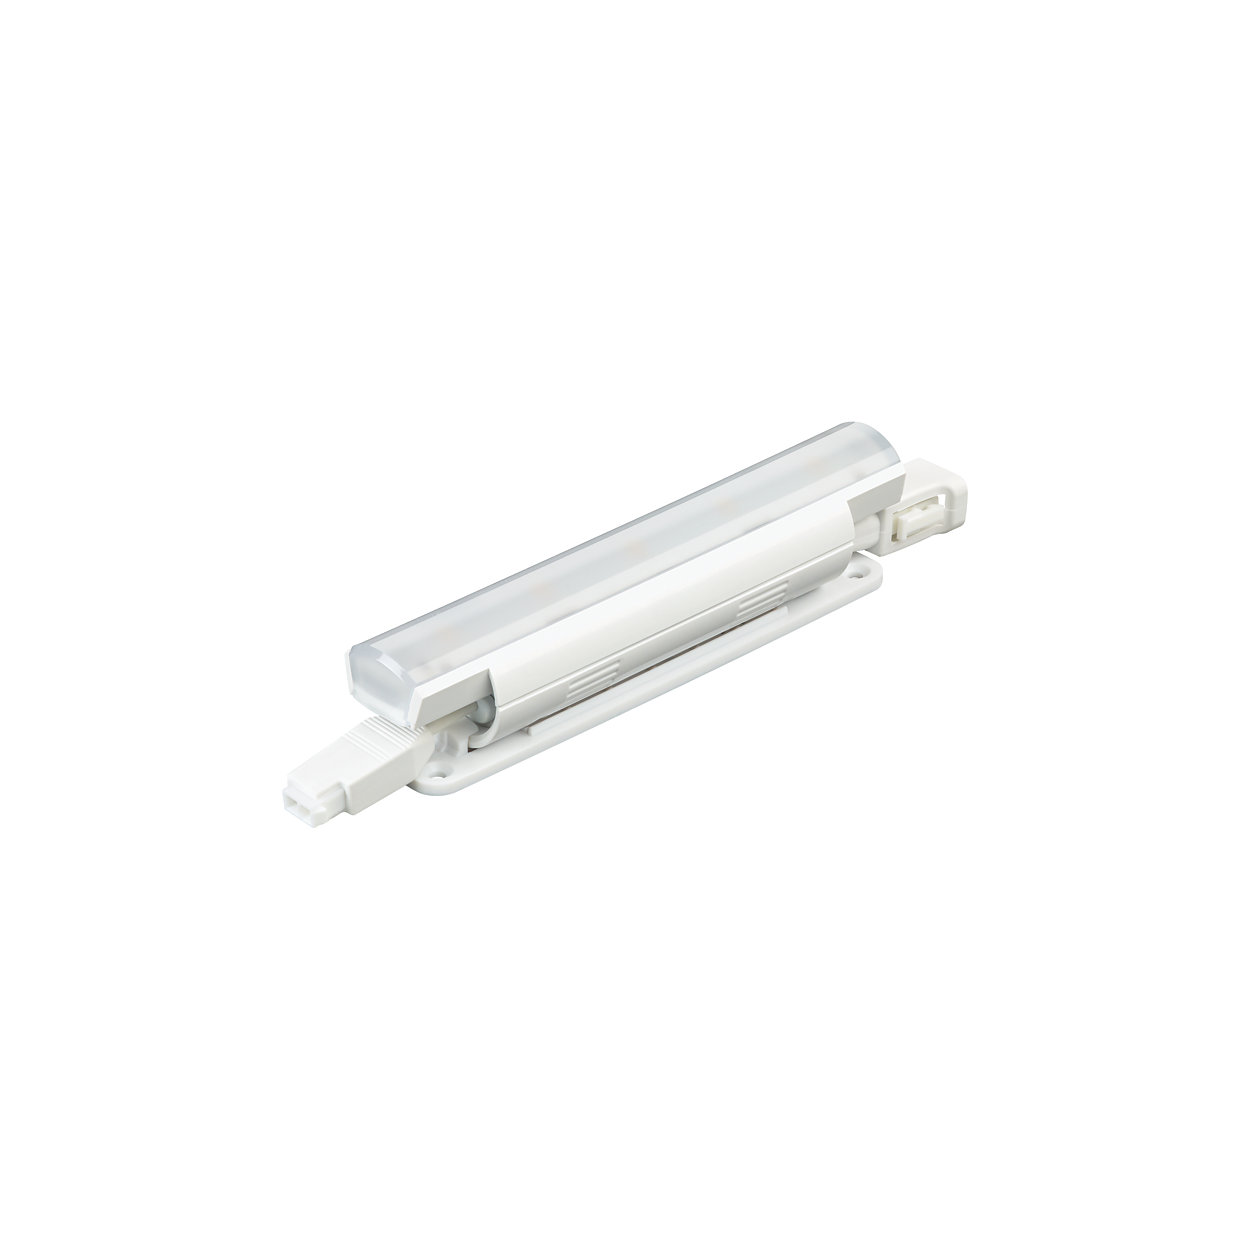 eW Cove QLX Powercore – Performance interior linear LED cove and accent luminaire with solid white light